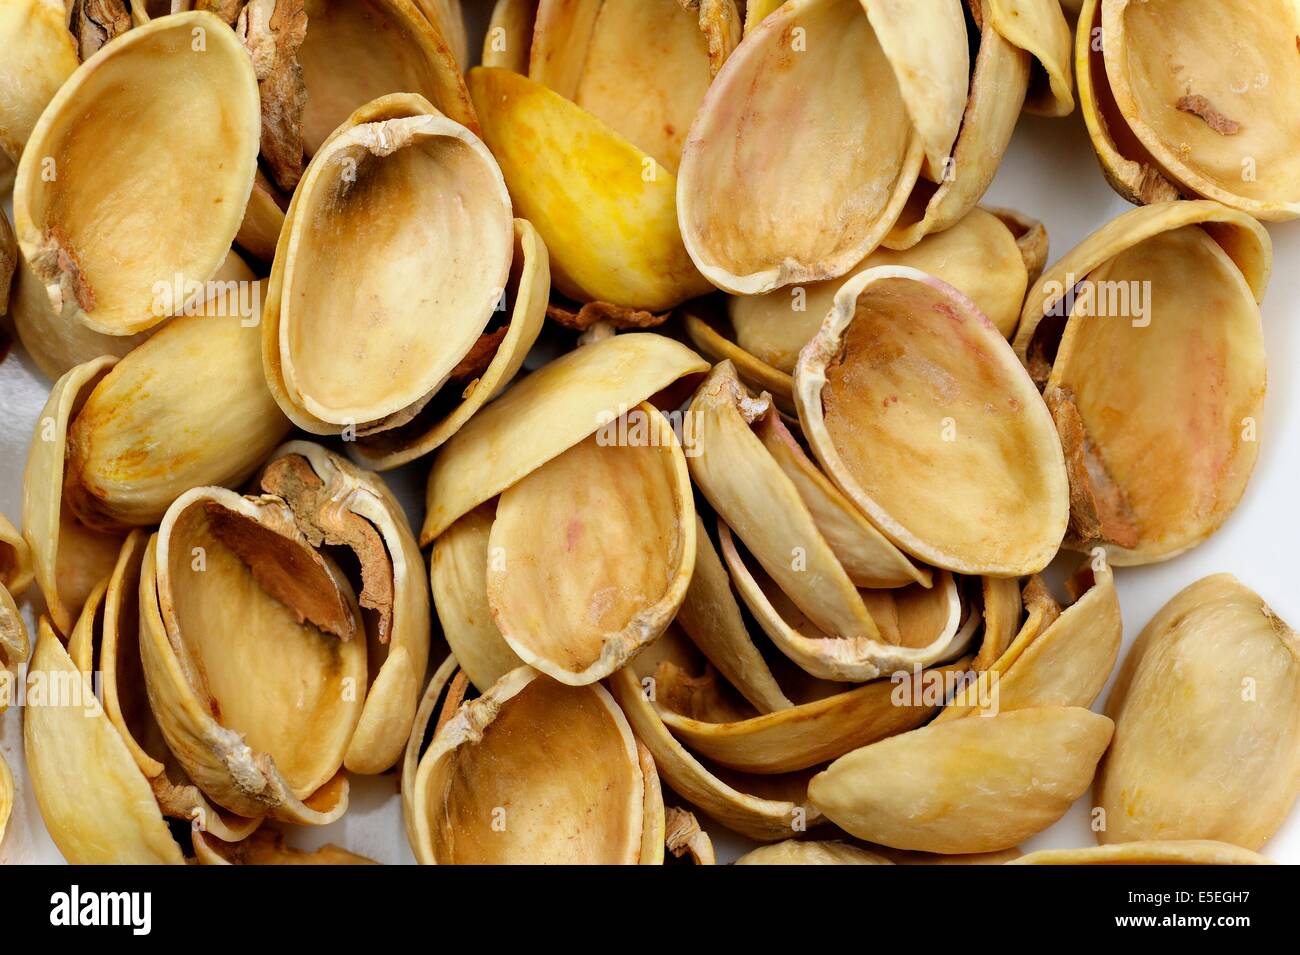 Roasted and salted pistachios Stock Photo